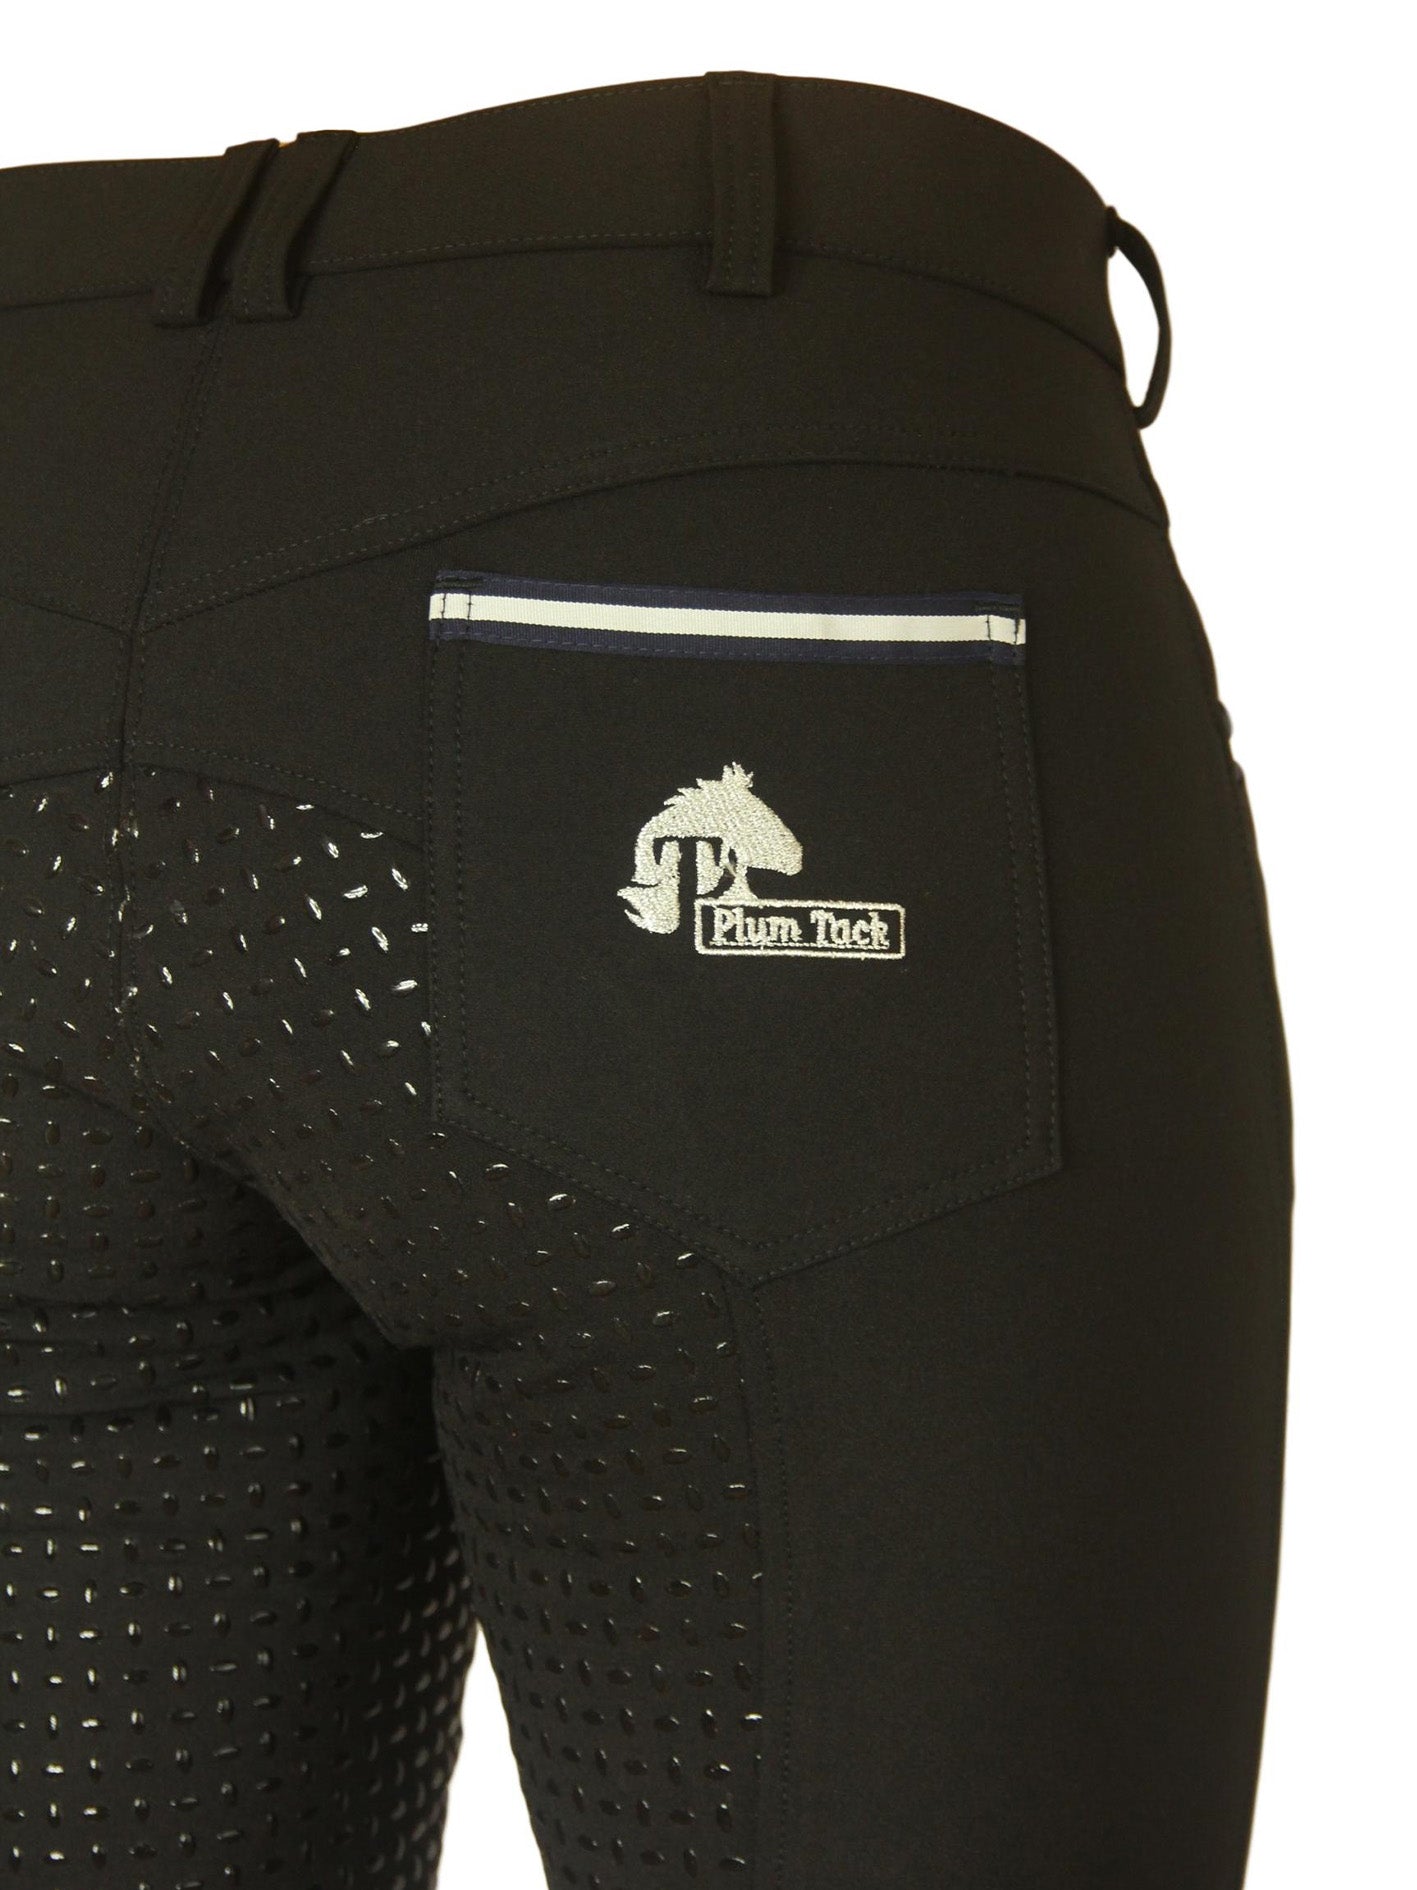 Bamboo Breeches in Black. Sizes 6 to 28